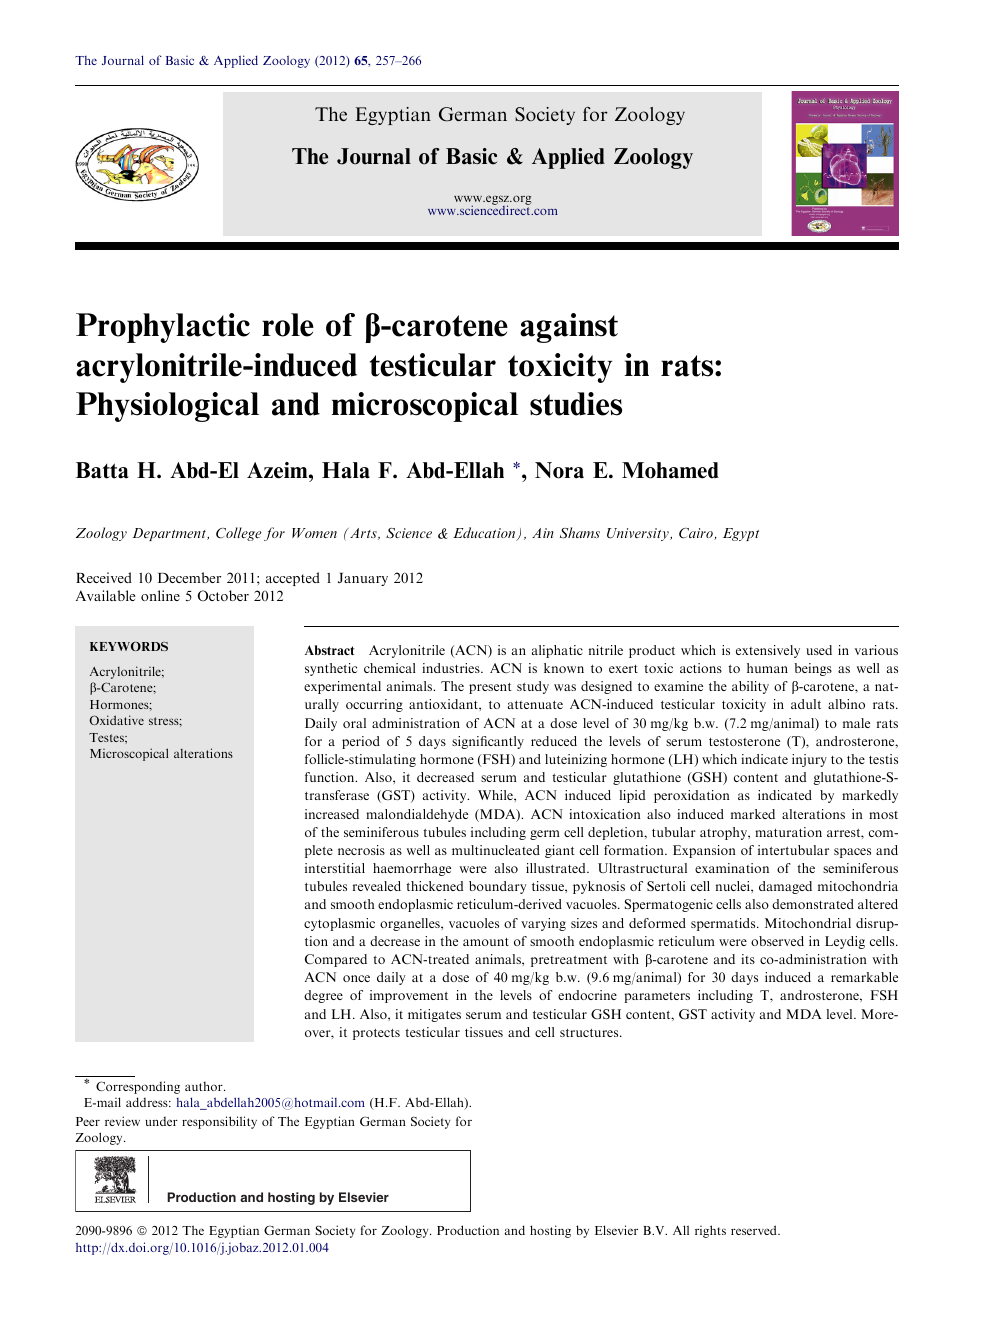 Prophylactic Role Of B Carotene Against Acrylonitrile Induced Testicular Toxicity In Rats Physiological And Microscopical Studies Topic Of Research Paper In Biological Sciences Download Scholarly Article Pdf And Read For Free On Cyberleninka